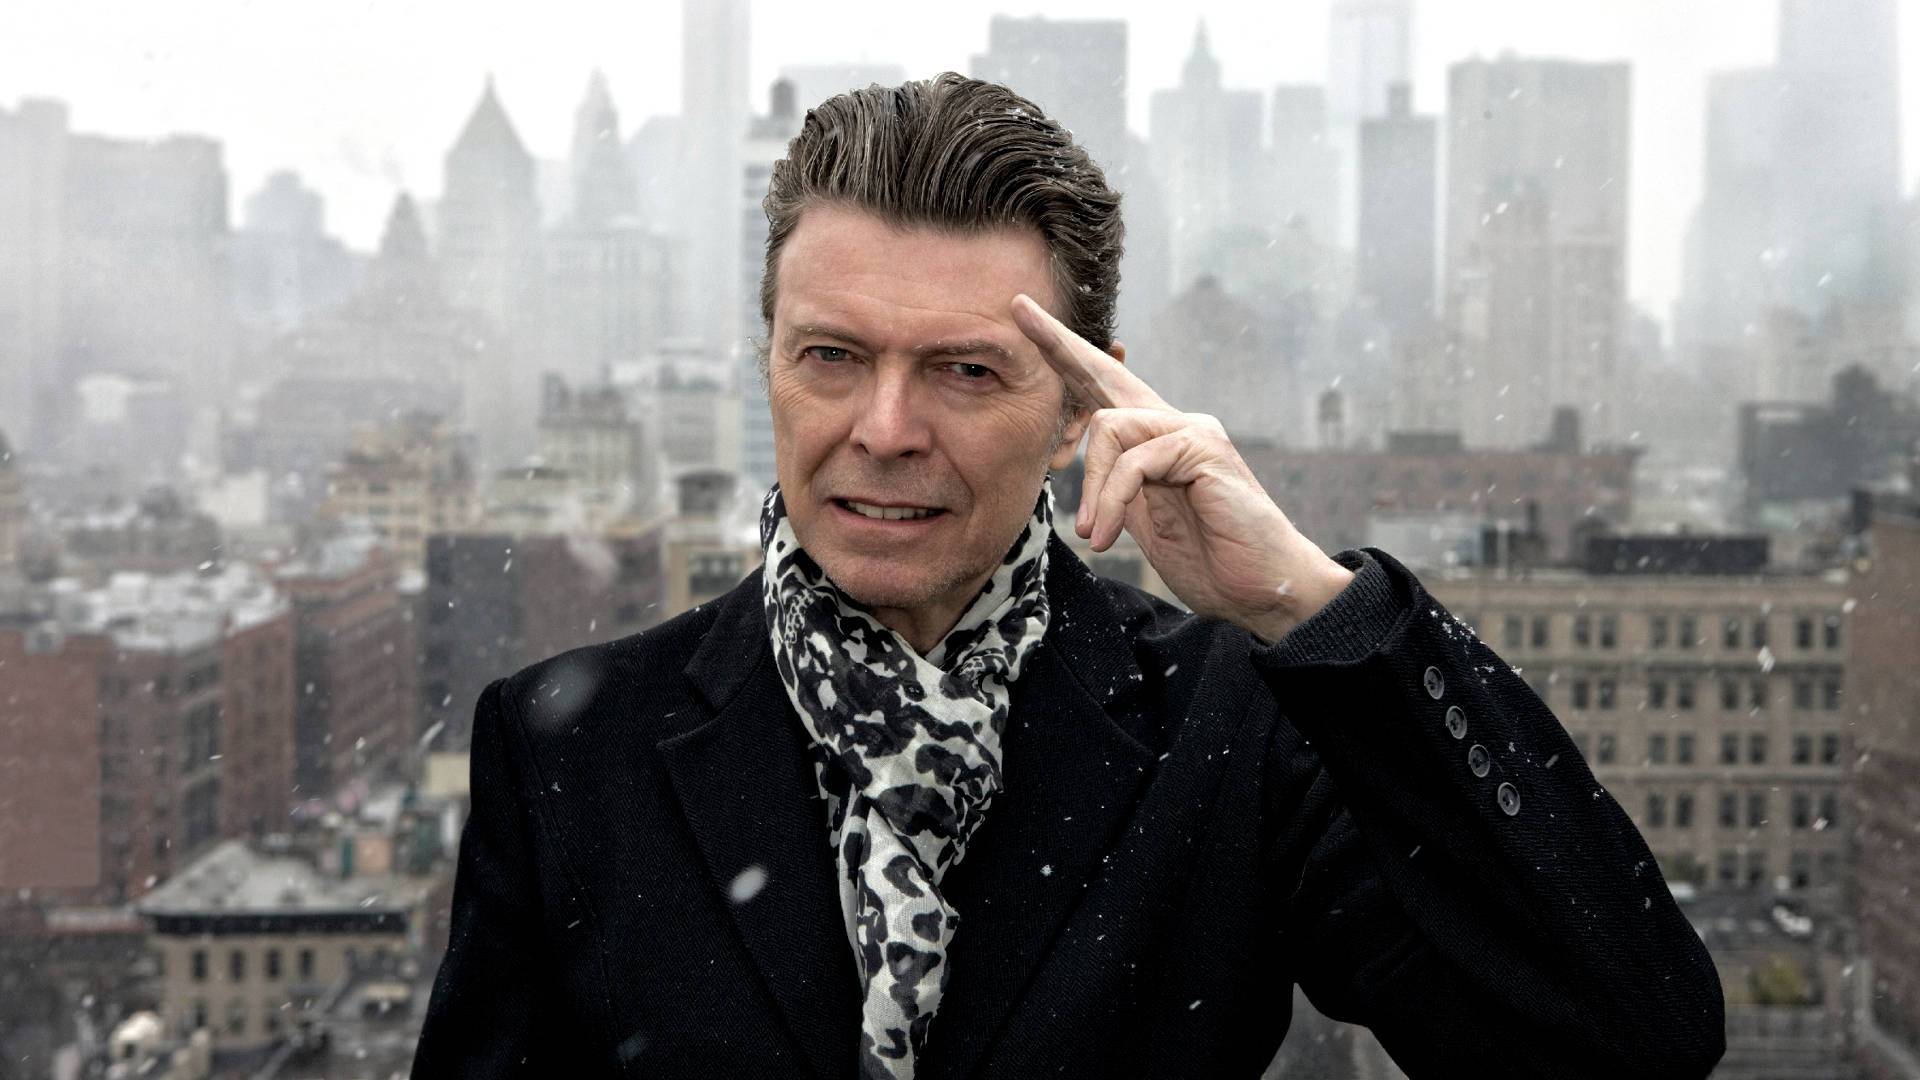 David Bowie Cityscape In Snow